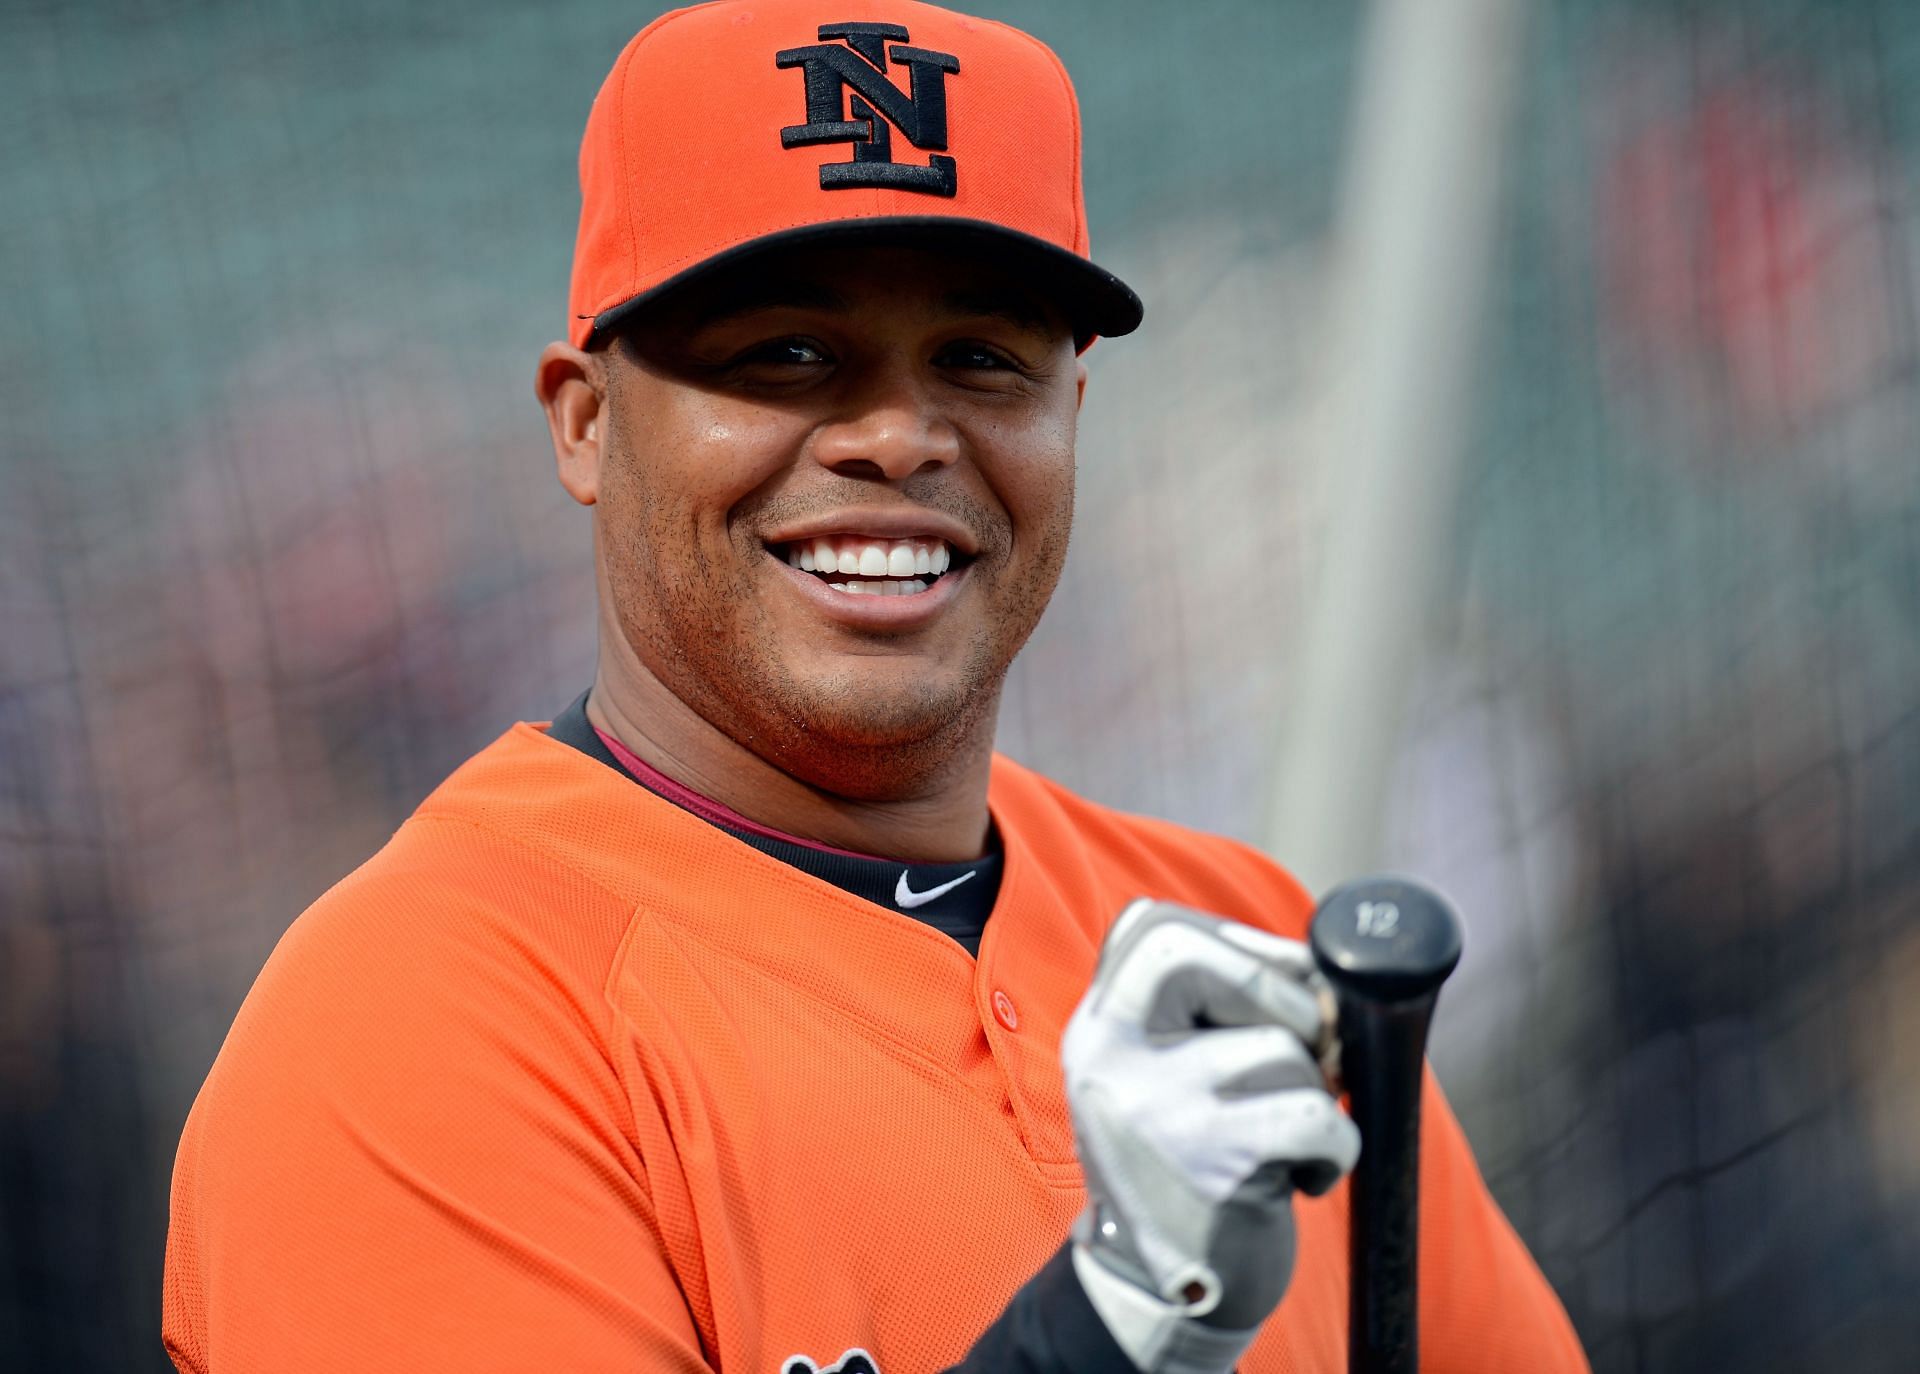 Andruw Jones receives boost in Hall of Fame voting